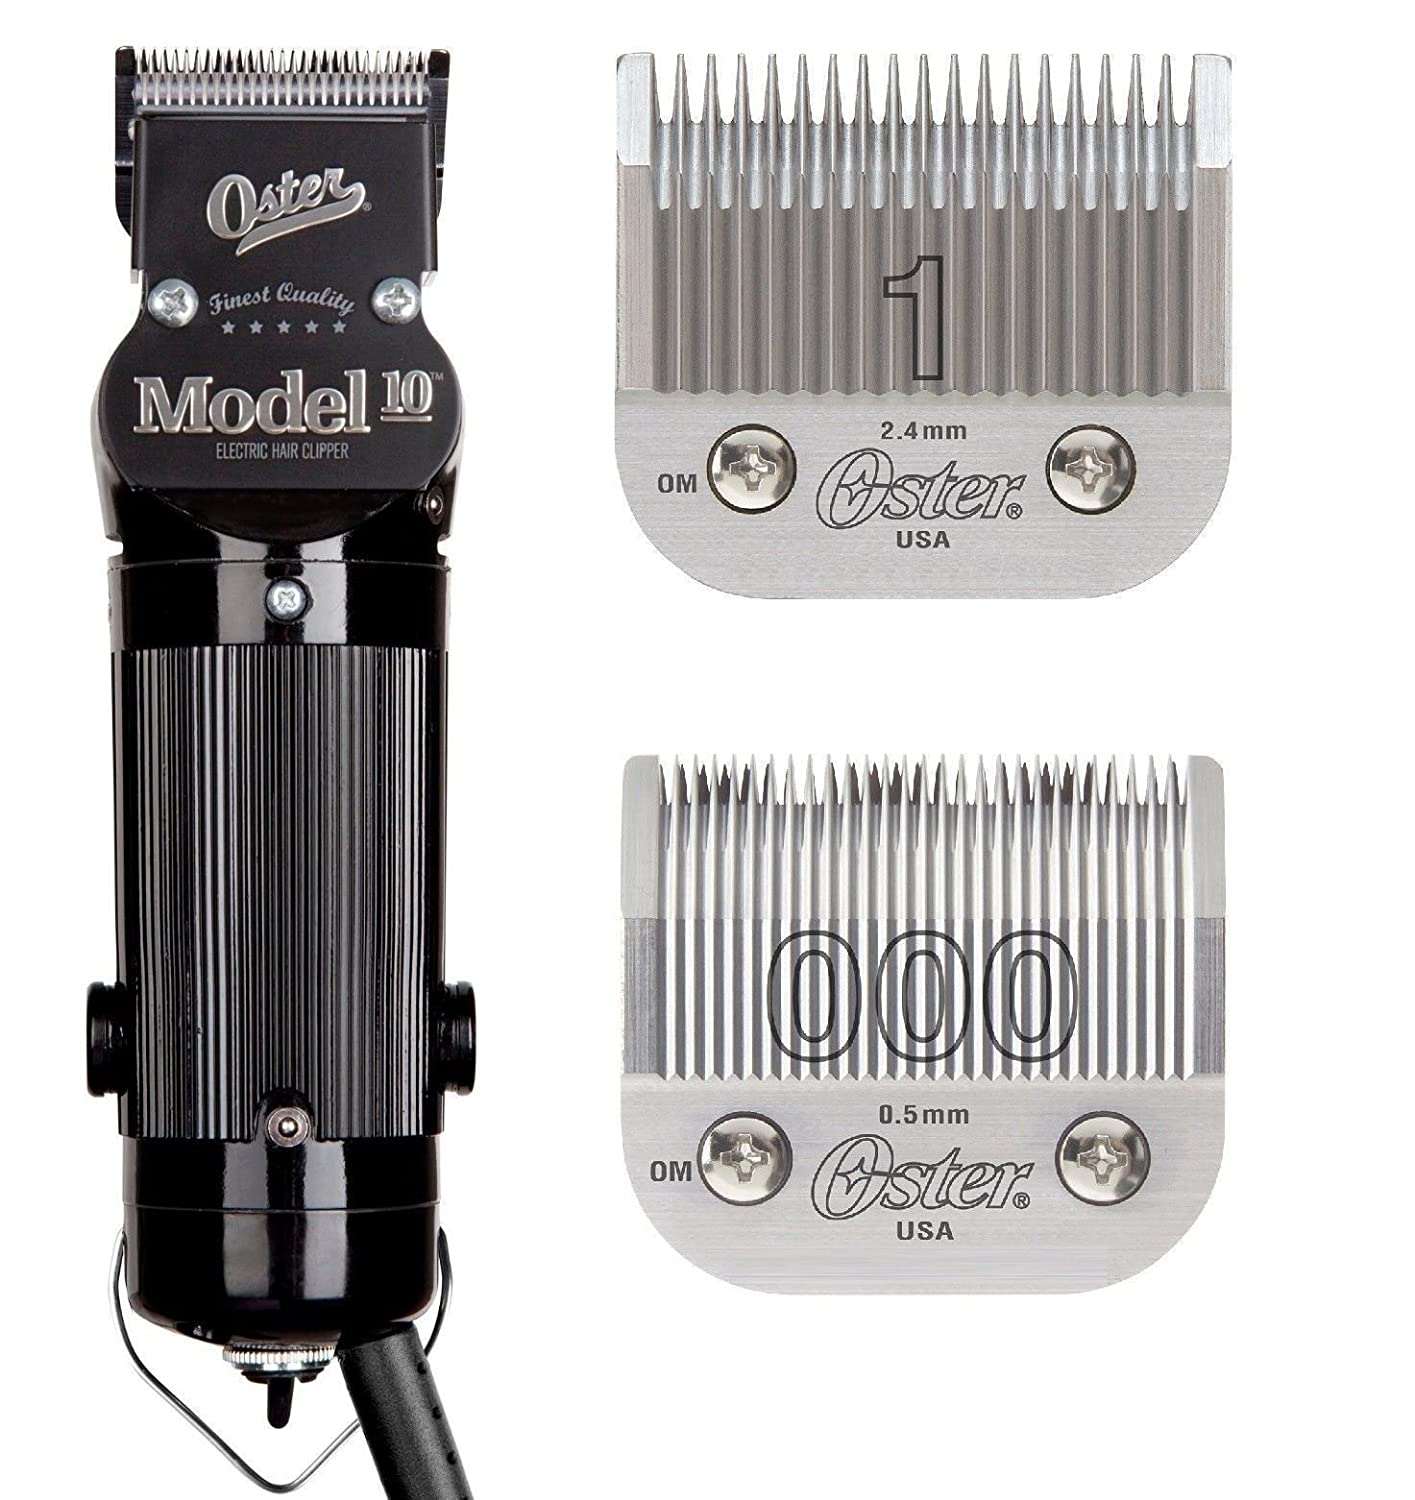 Oster Model 10 Classic Professional Barber Salon Pro Hair Grooming Clipper